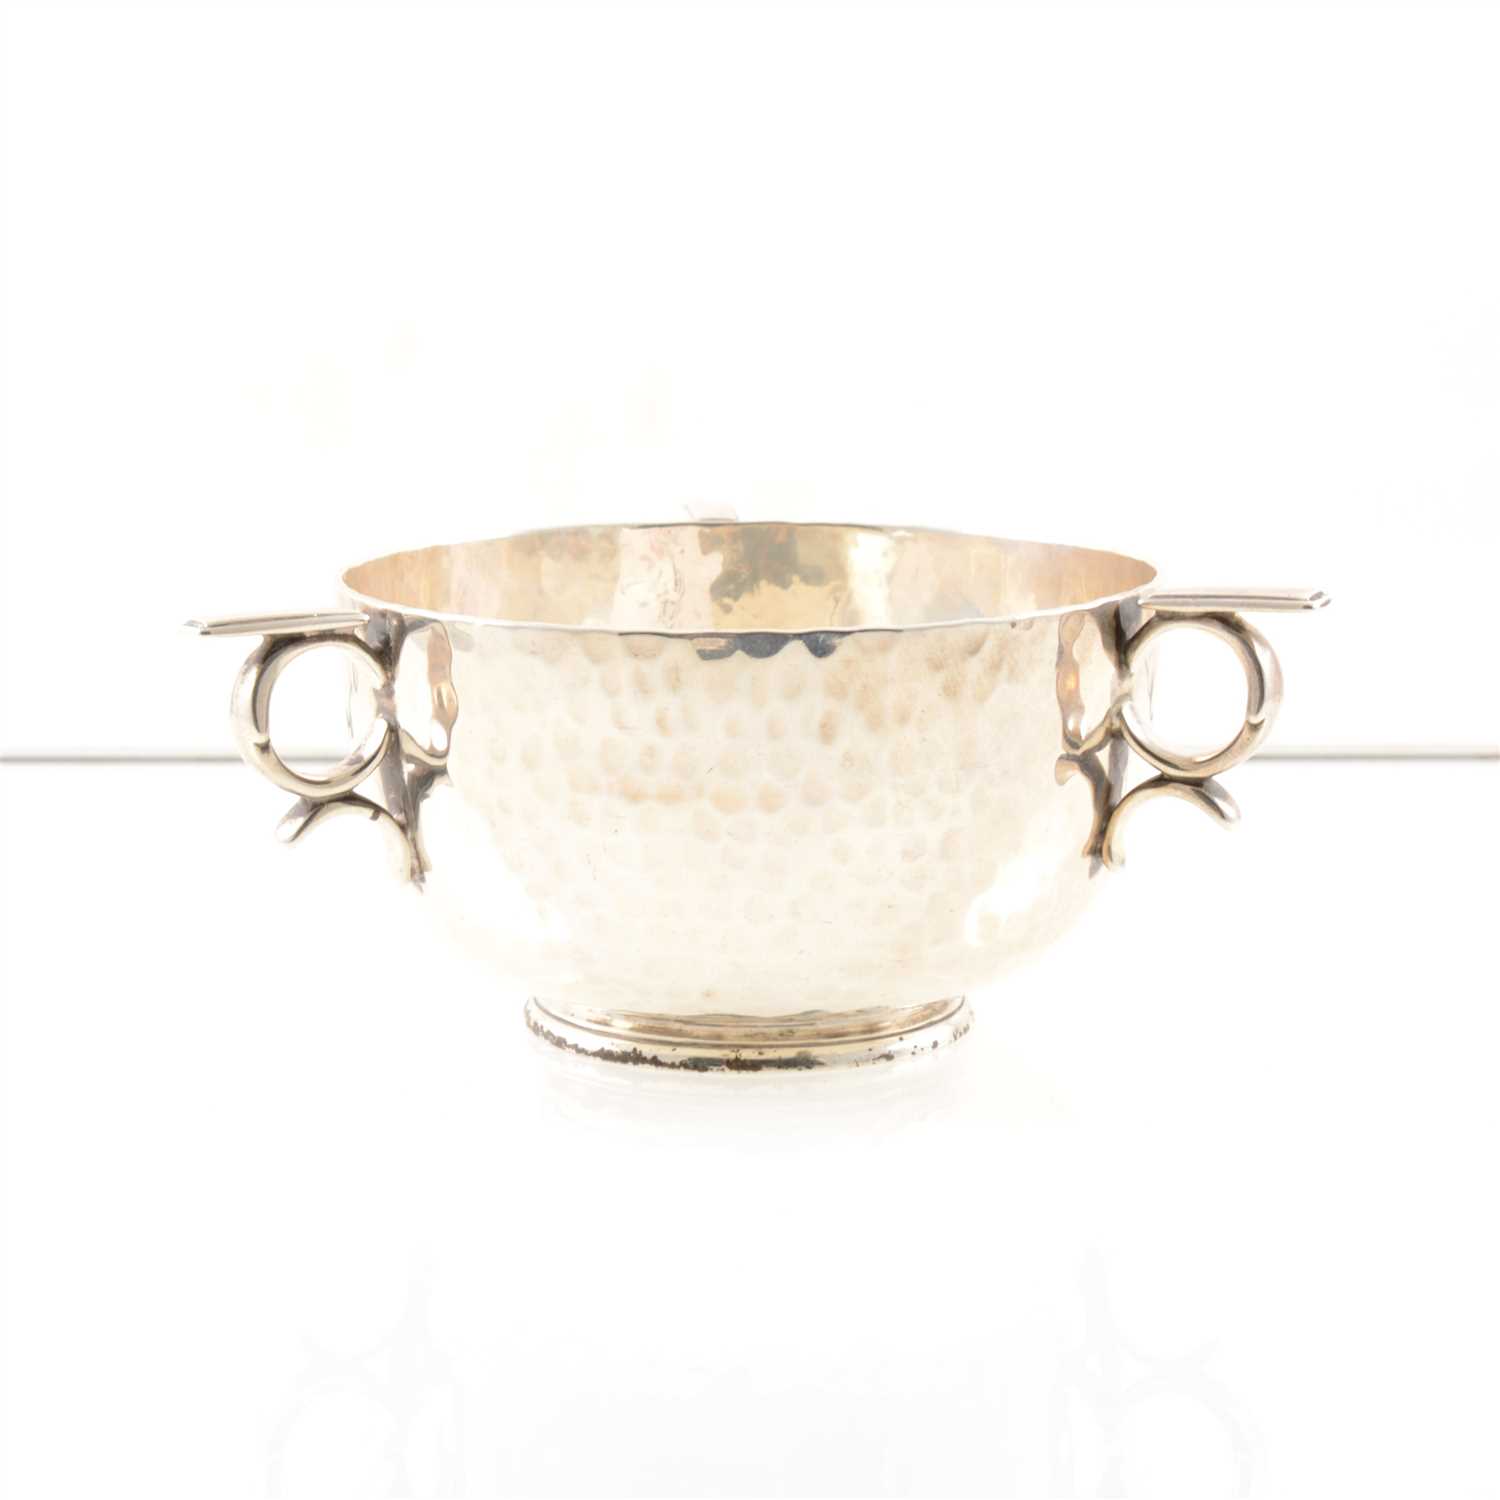 Lot 211 - A silver bowl by Boodle & Dunthorne, hammered finish with three handles, base engraved "Dunthorne 13 Lord Street Liverpool", London 1903, approx. weight 8.5oz.